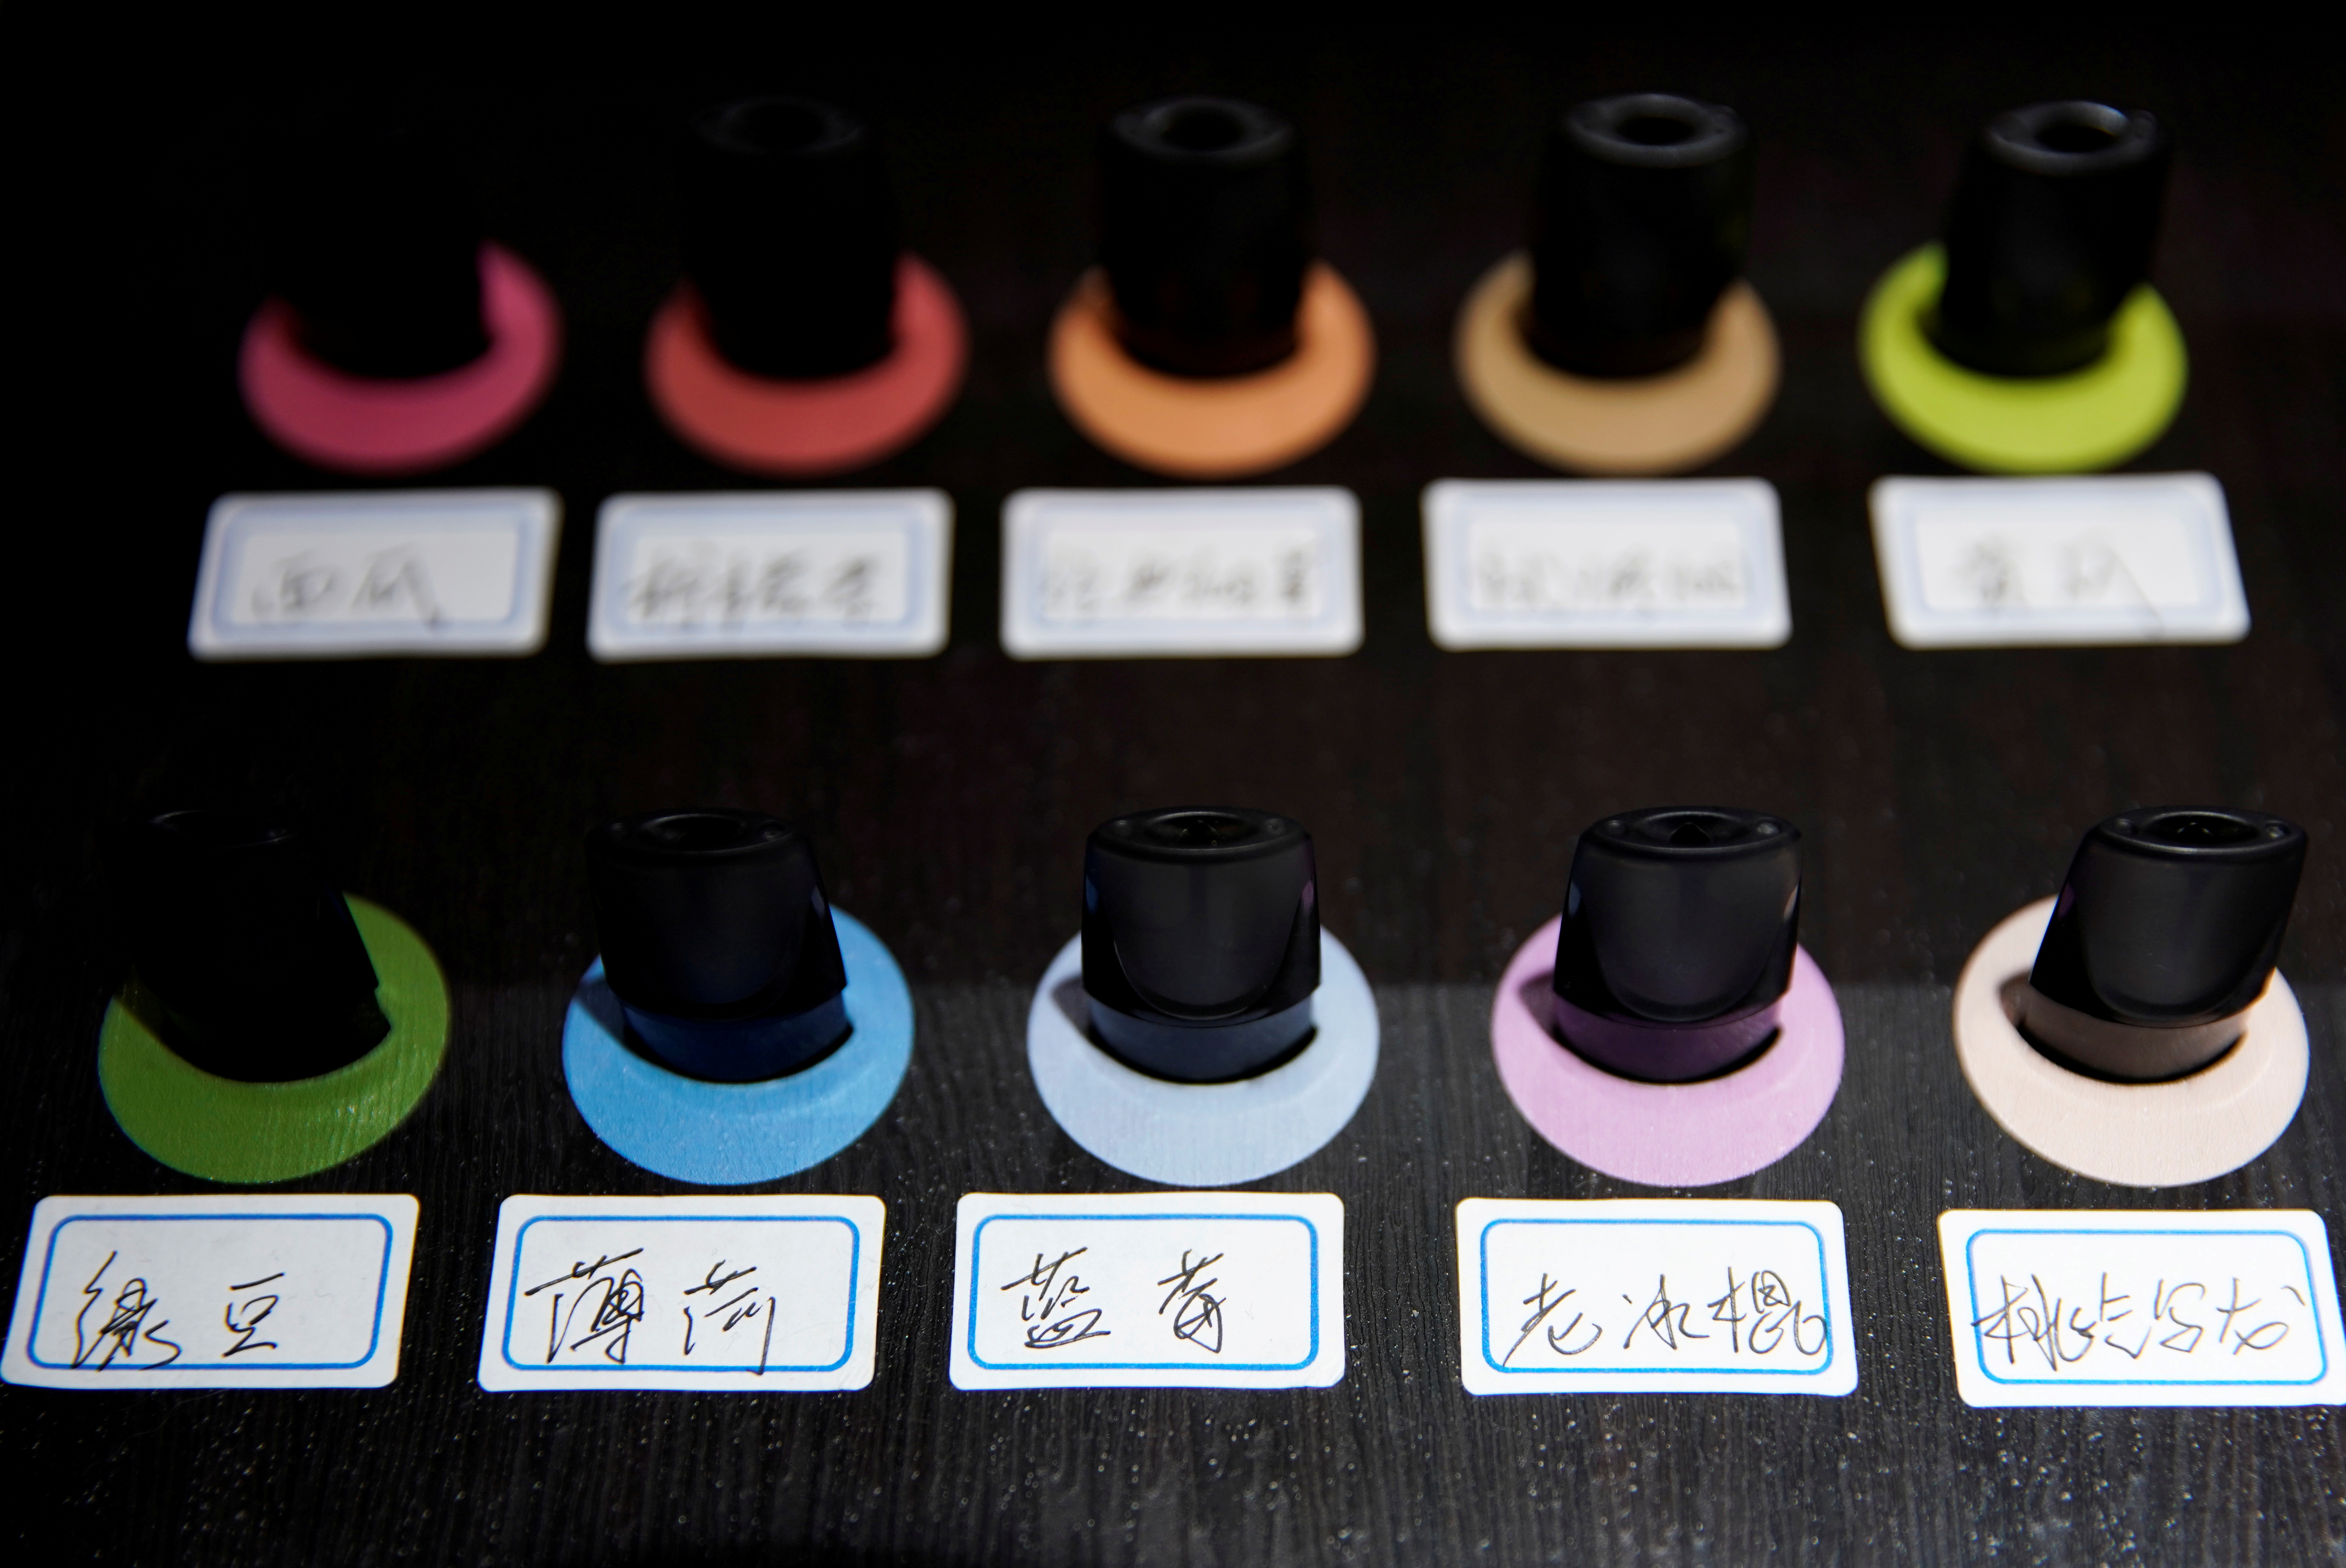 Pods of different flavors are seen on display at an authorized reseller store of Chinese e-cigarette company Relx in Shanghai